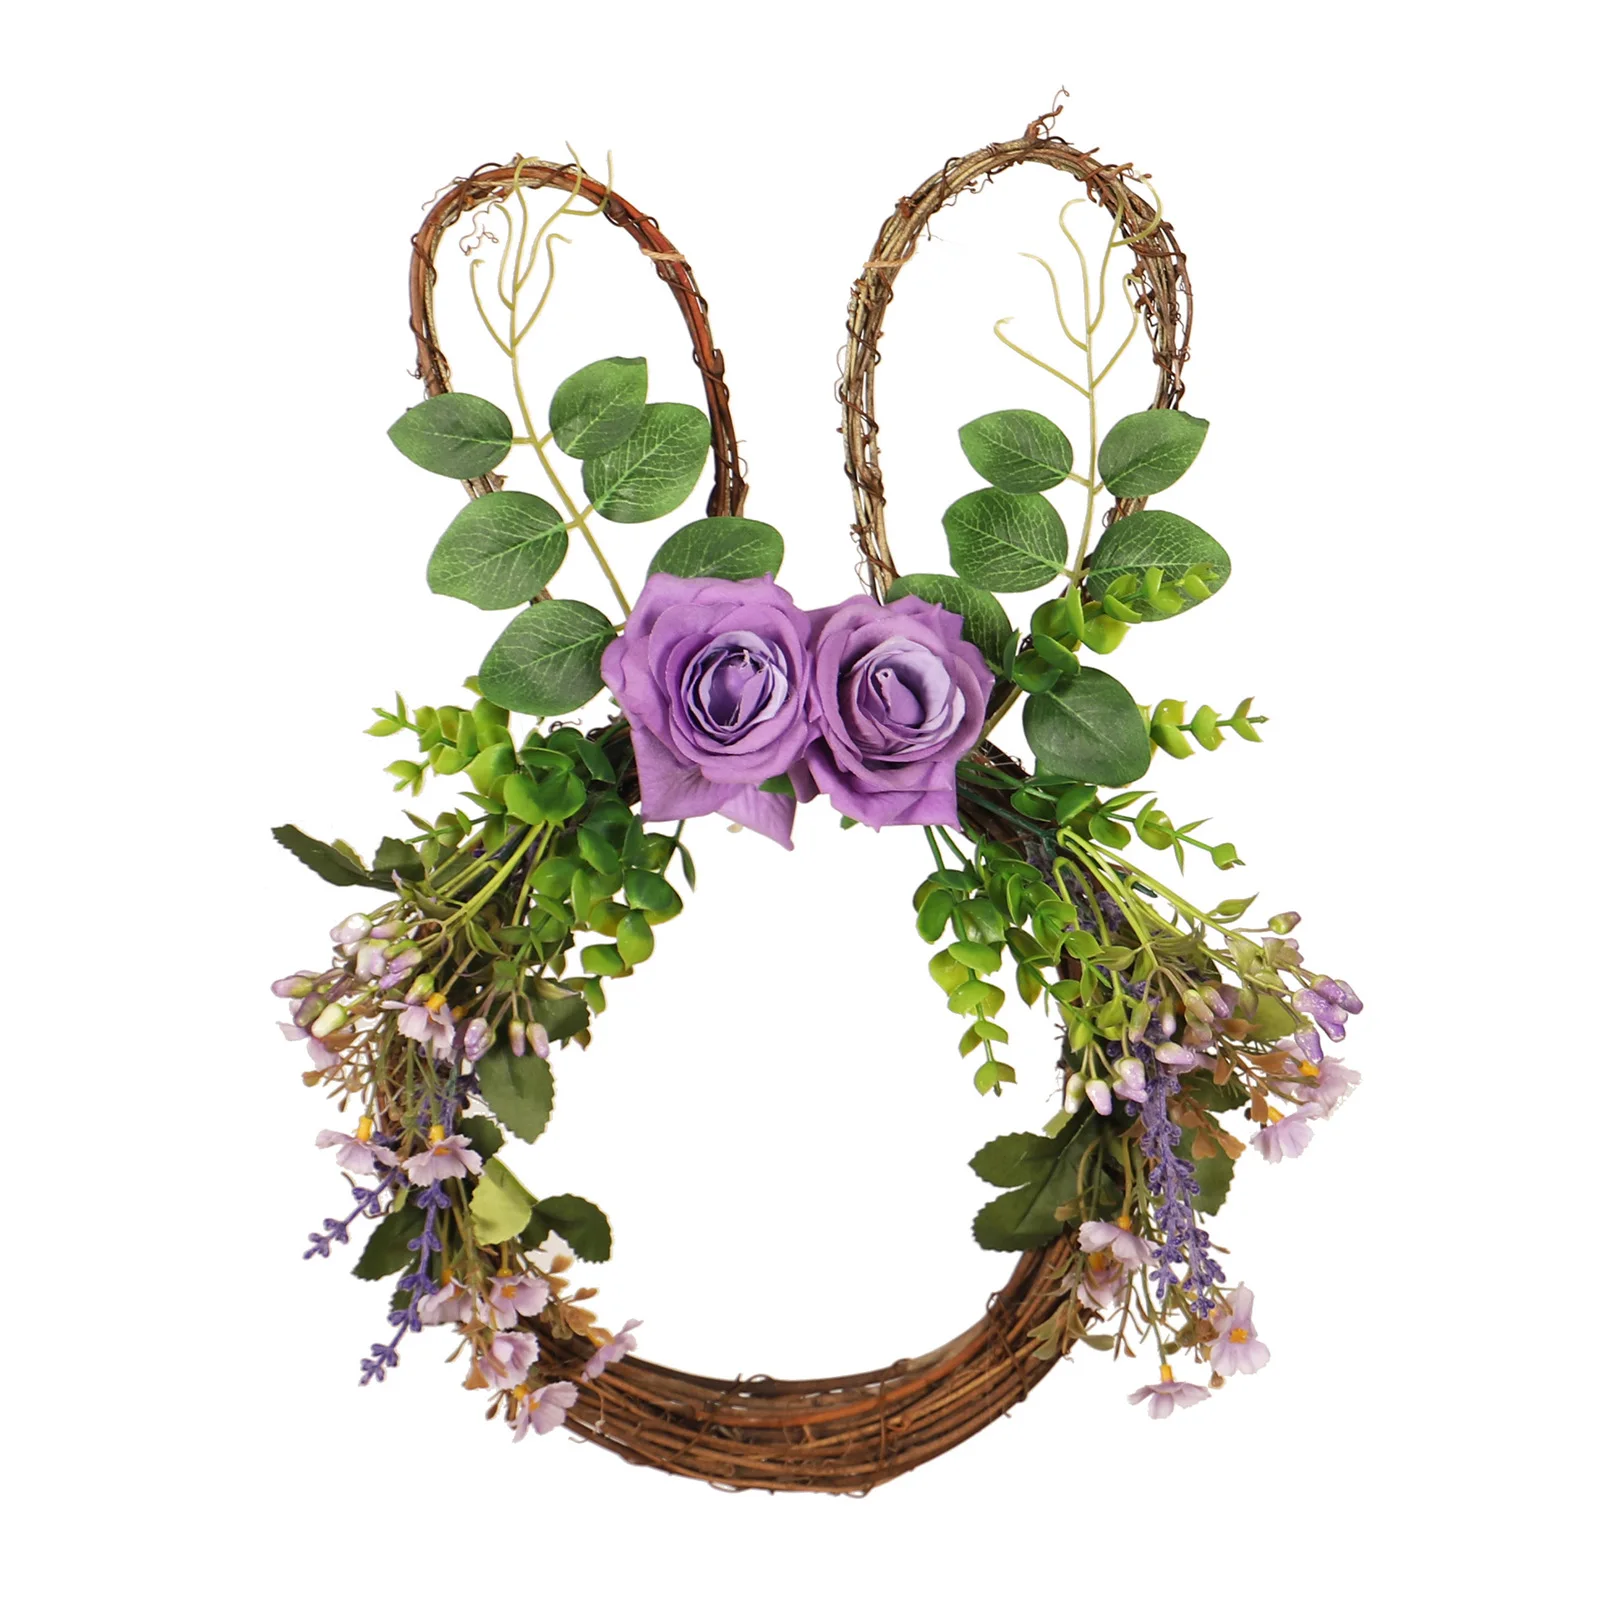 

Easter Bunny Garland Flower Wreath Blossom Purple Rose with Green Leaves Rattan for Front Door Indoor Wall Window Decor